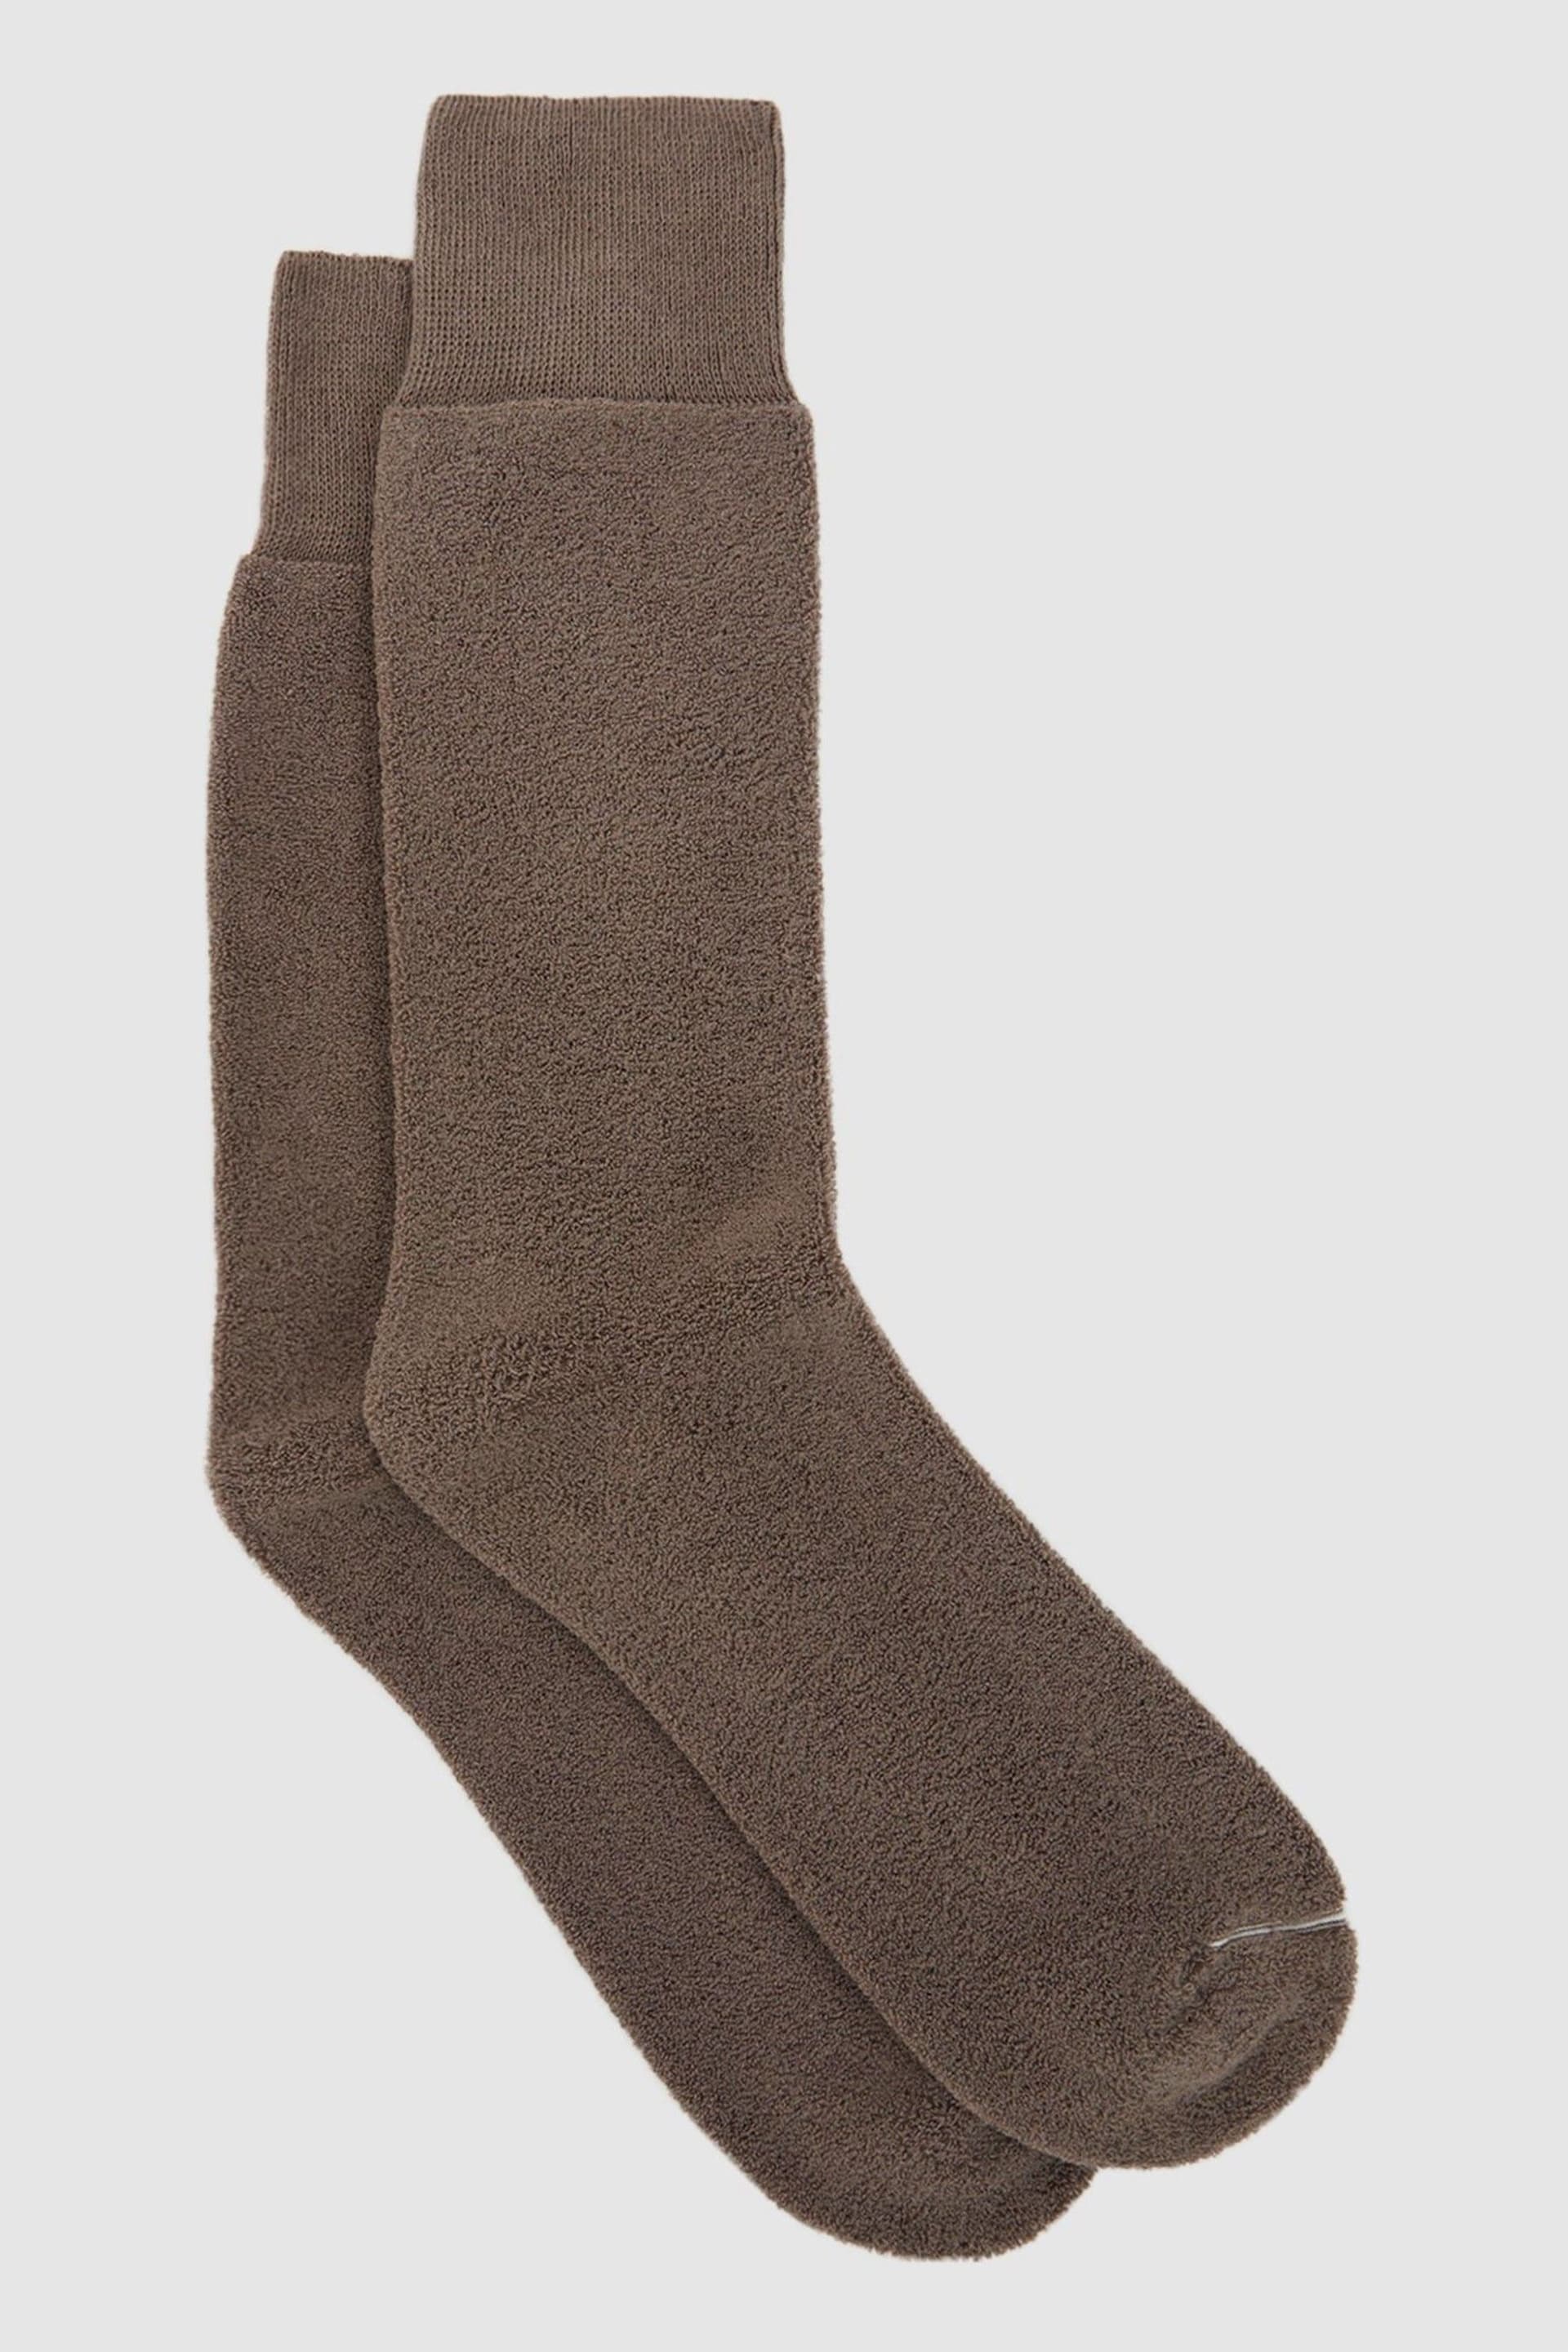 Reiss Taupe Melange Alers Cotton Blend Terry Towelling Socks - Image 1 of 3